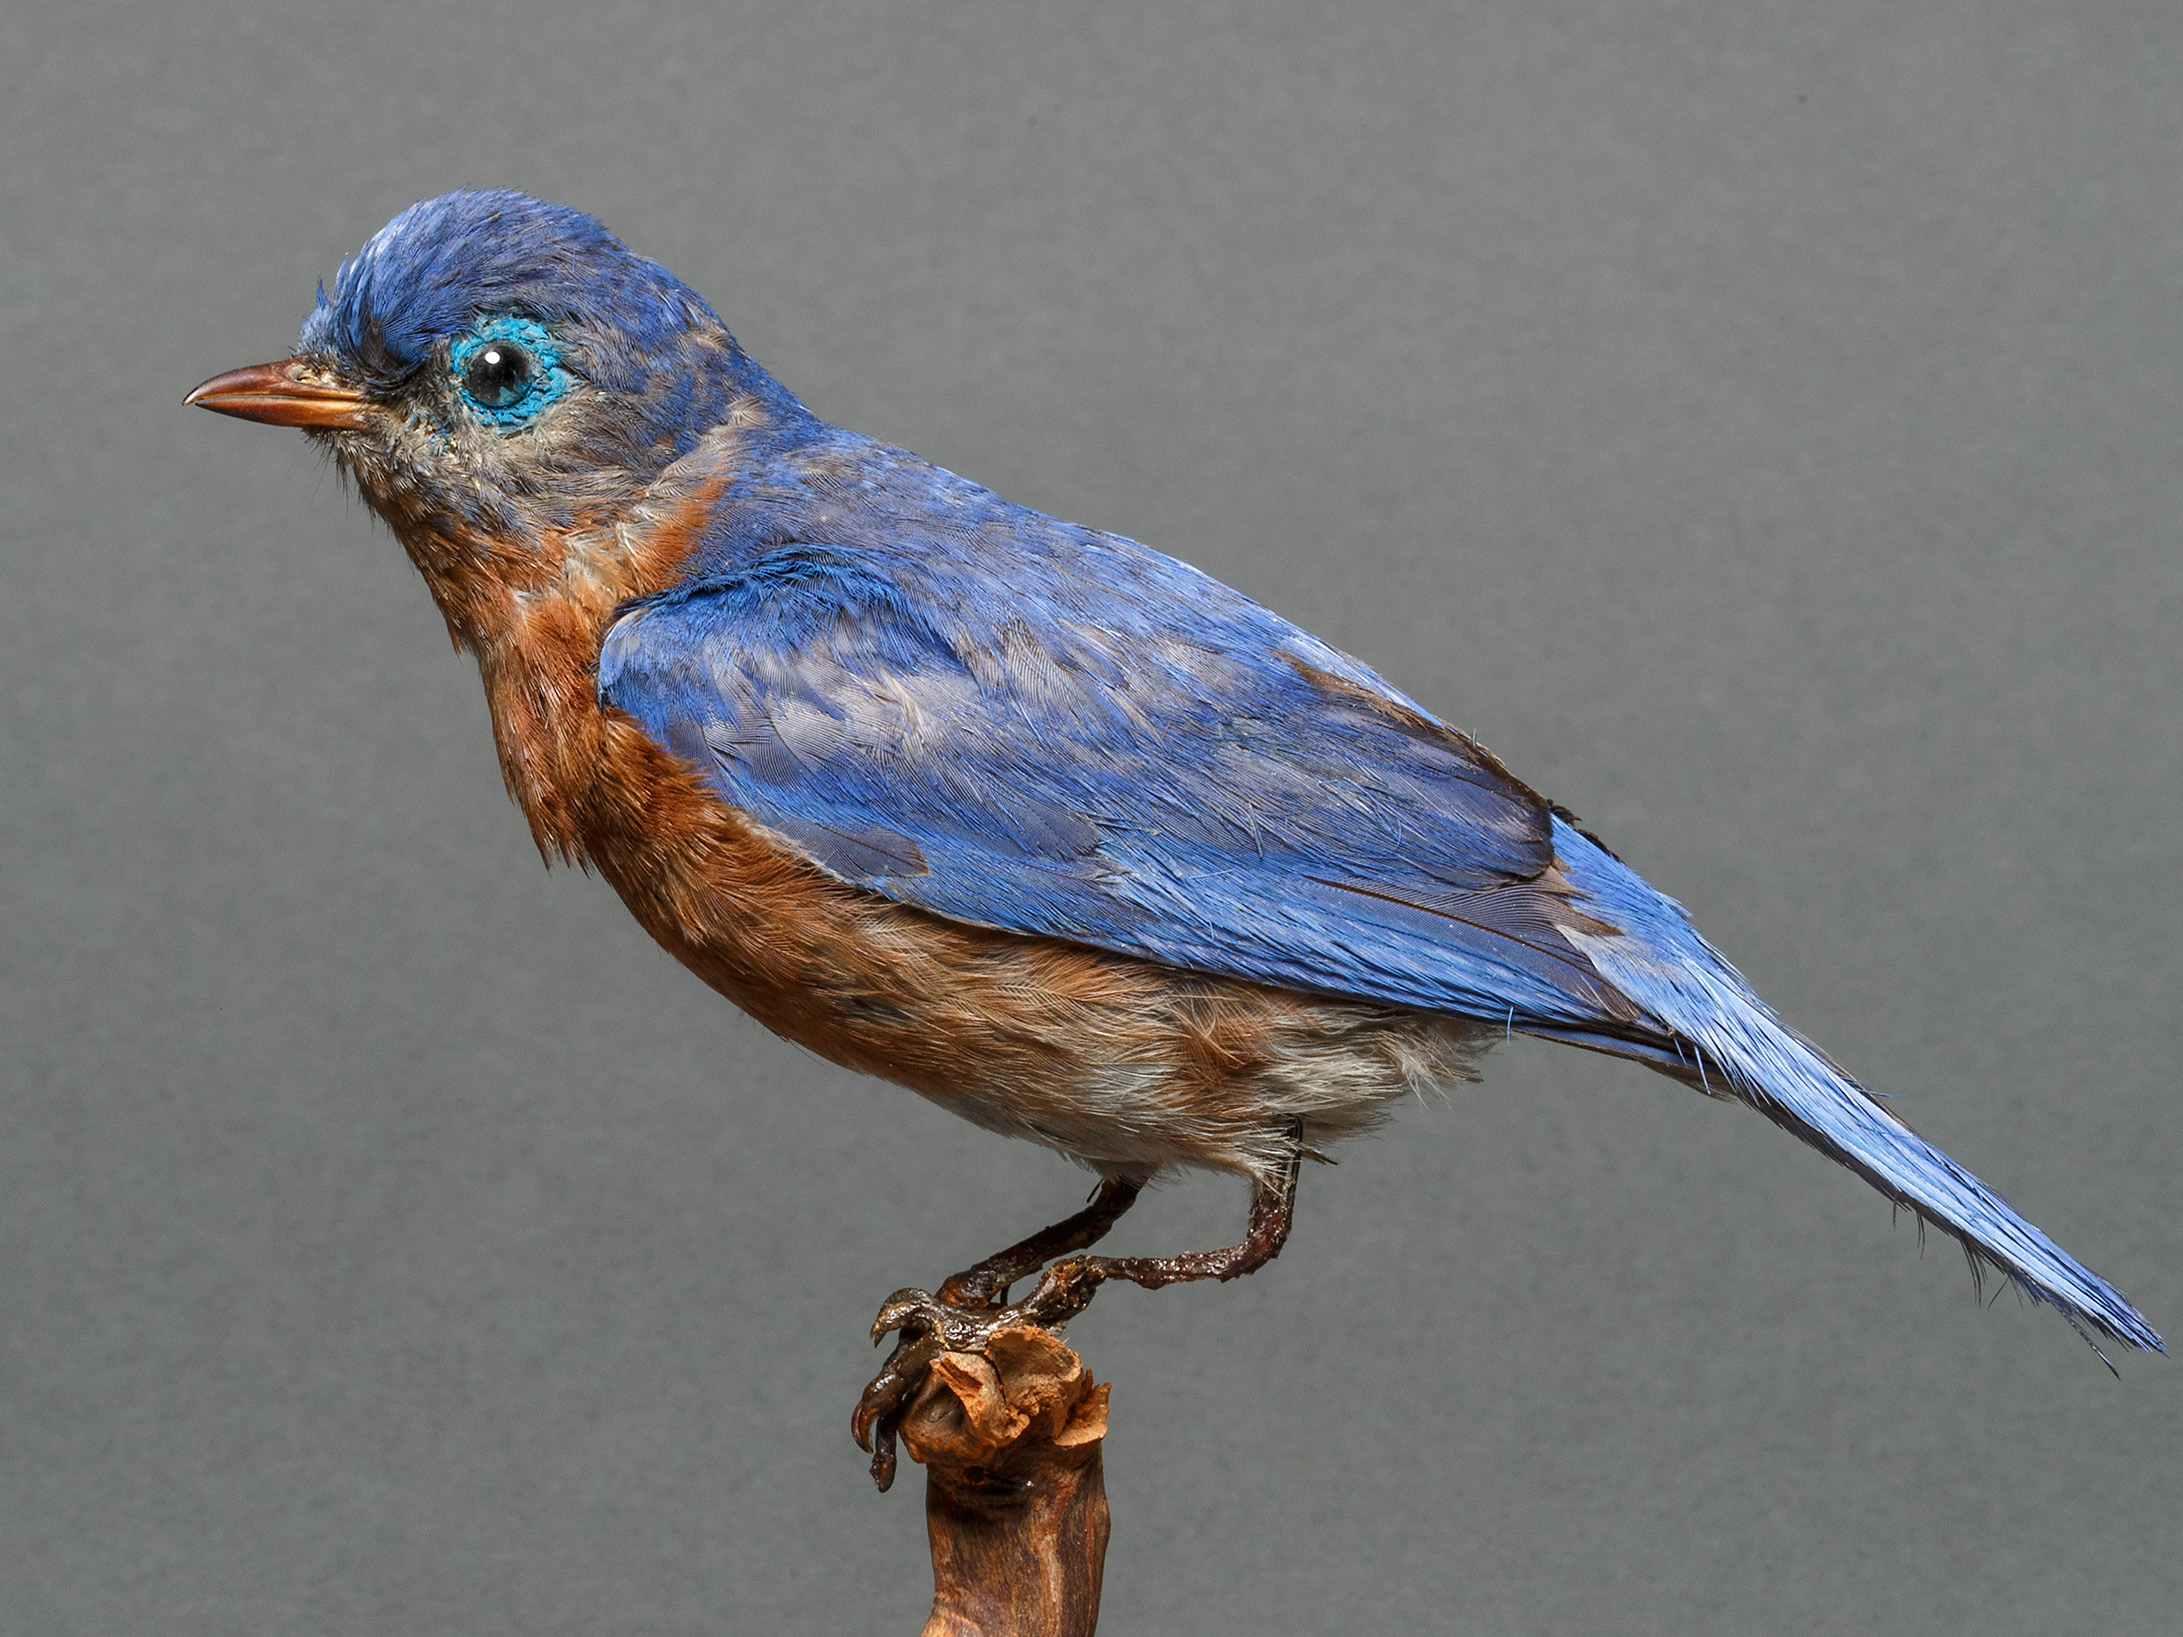 A photograph of a taxidermy bluebird perched on a branch with a grey background